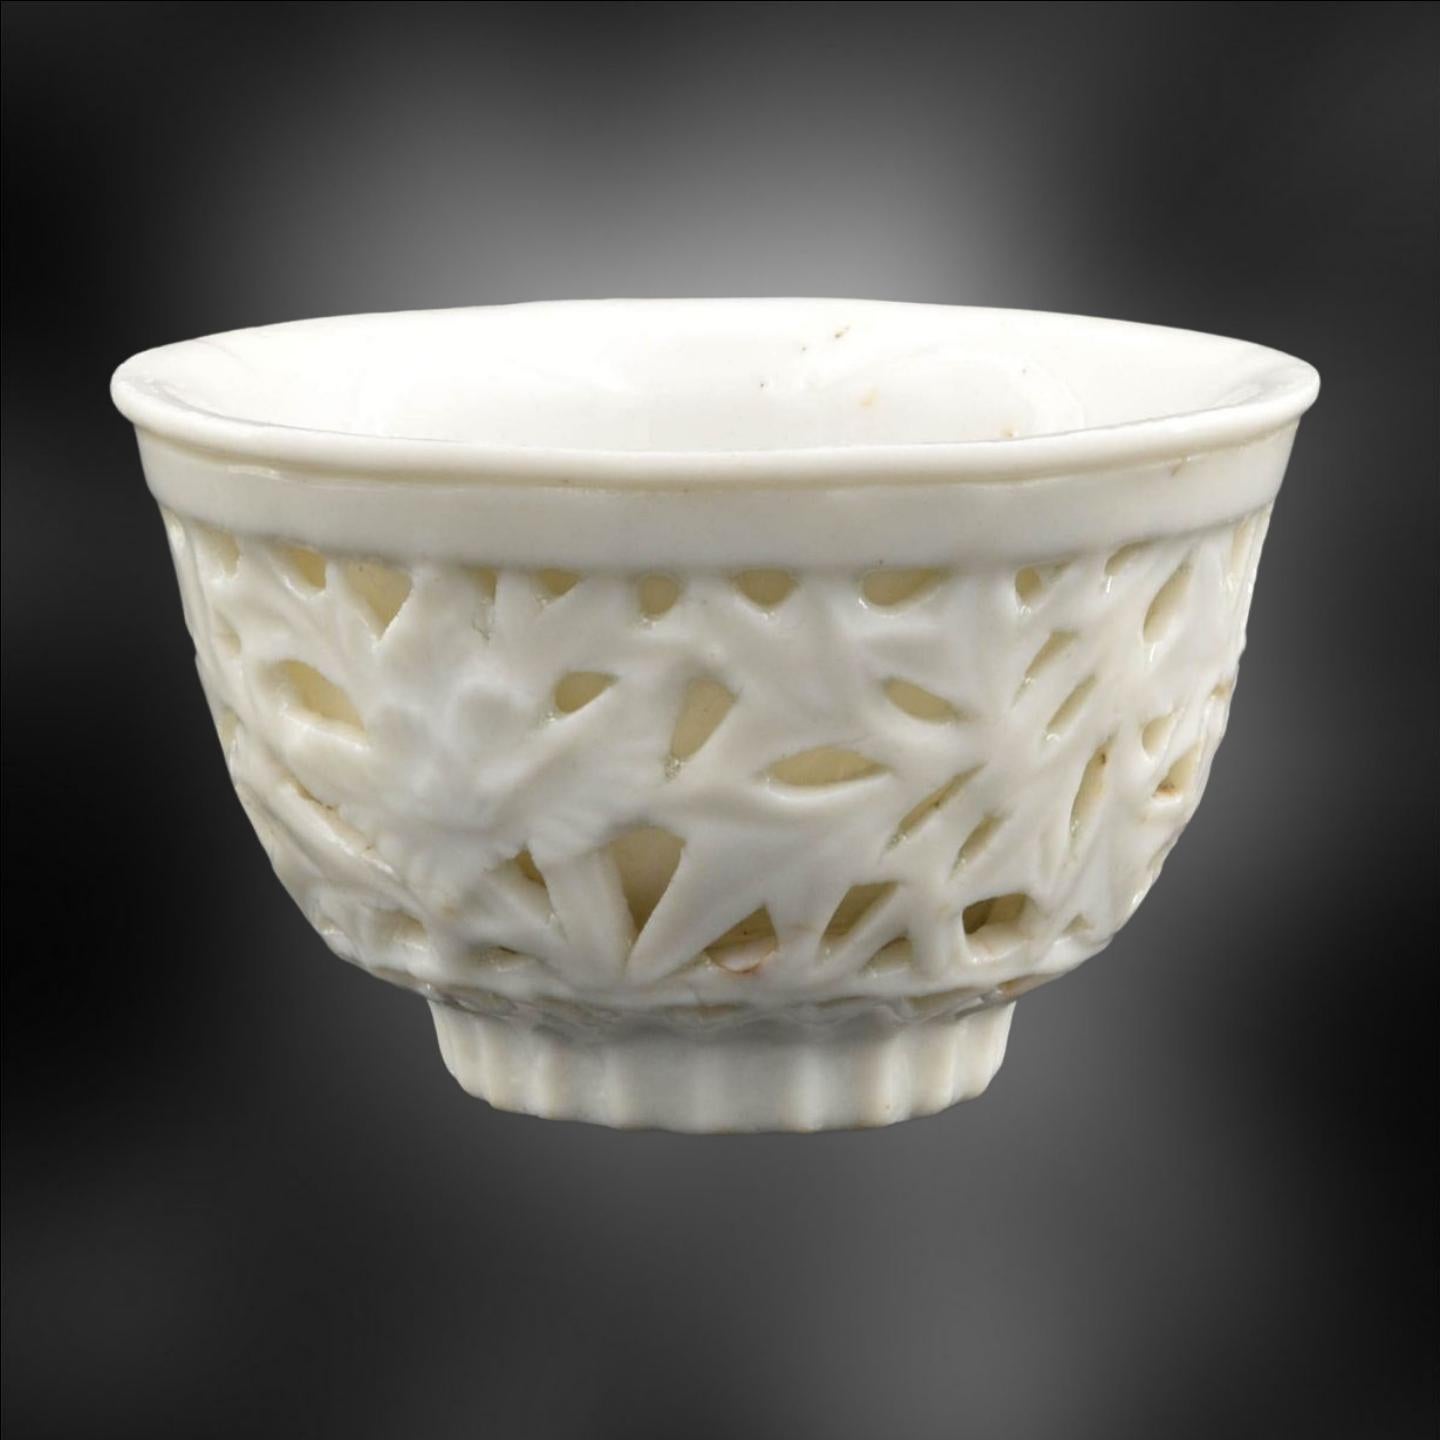 This is a stunning antique Blanc de Chine double walled tea bowl! This elegant piece is perfect for collectors and enthusiasts for antique china. The perforated outer wall is moulded with a beautiful foliated bamboo pattern, showcasing the